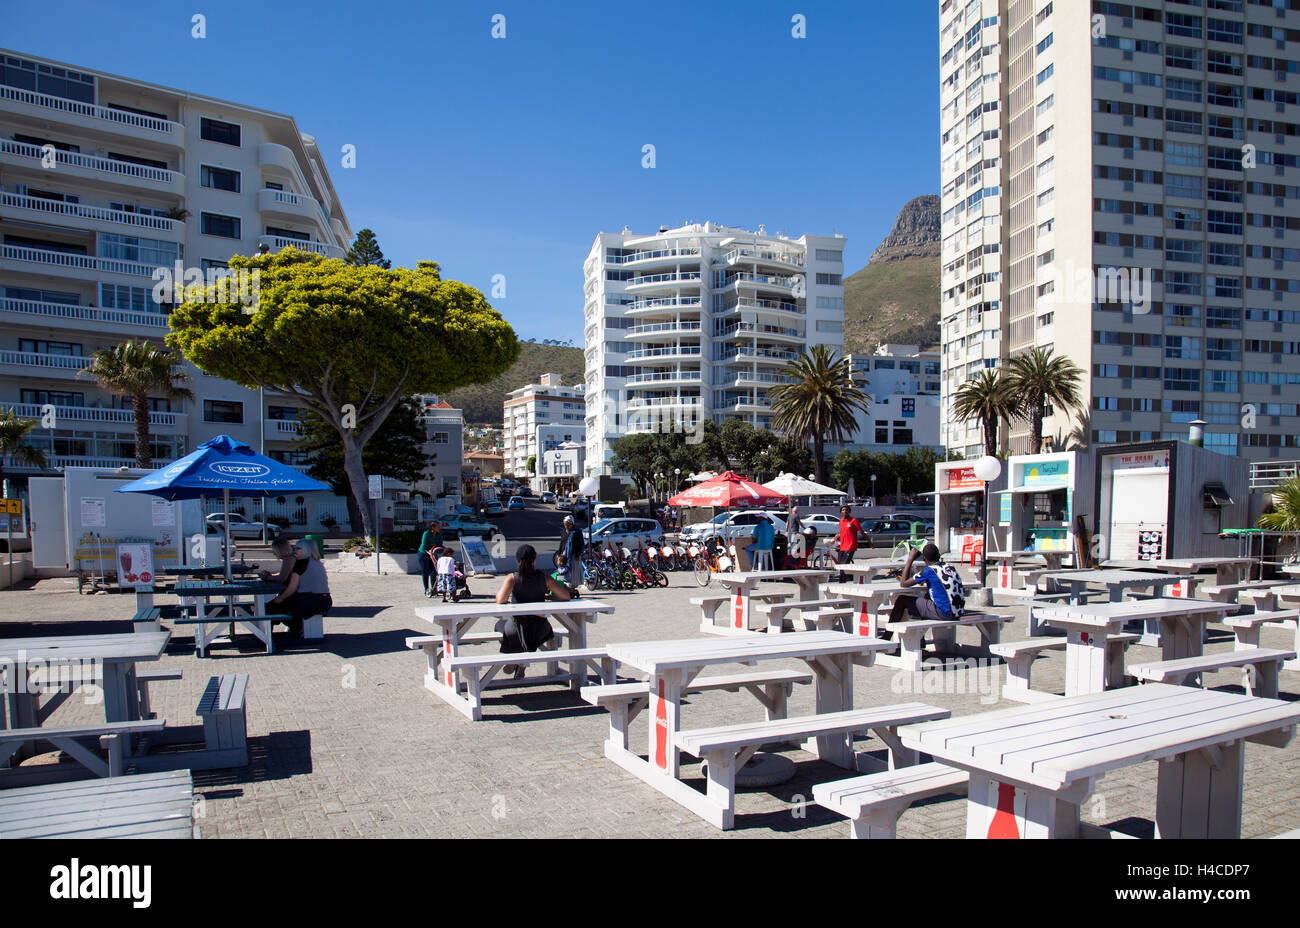 Food Kiosks on Sea Point Promenade in Cape Town - South Africa Stock Photo